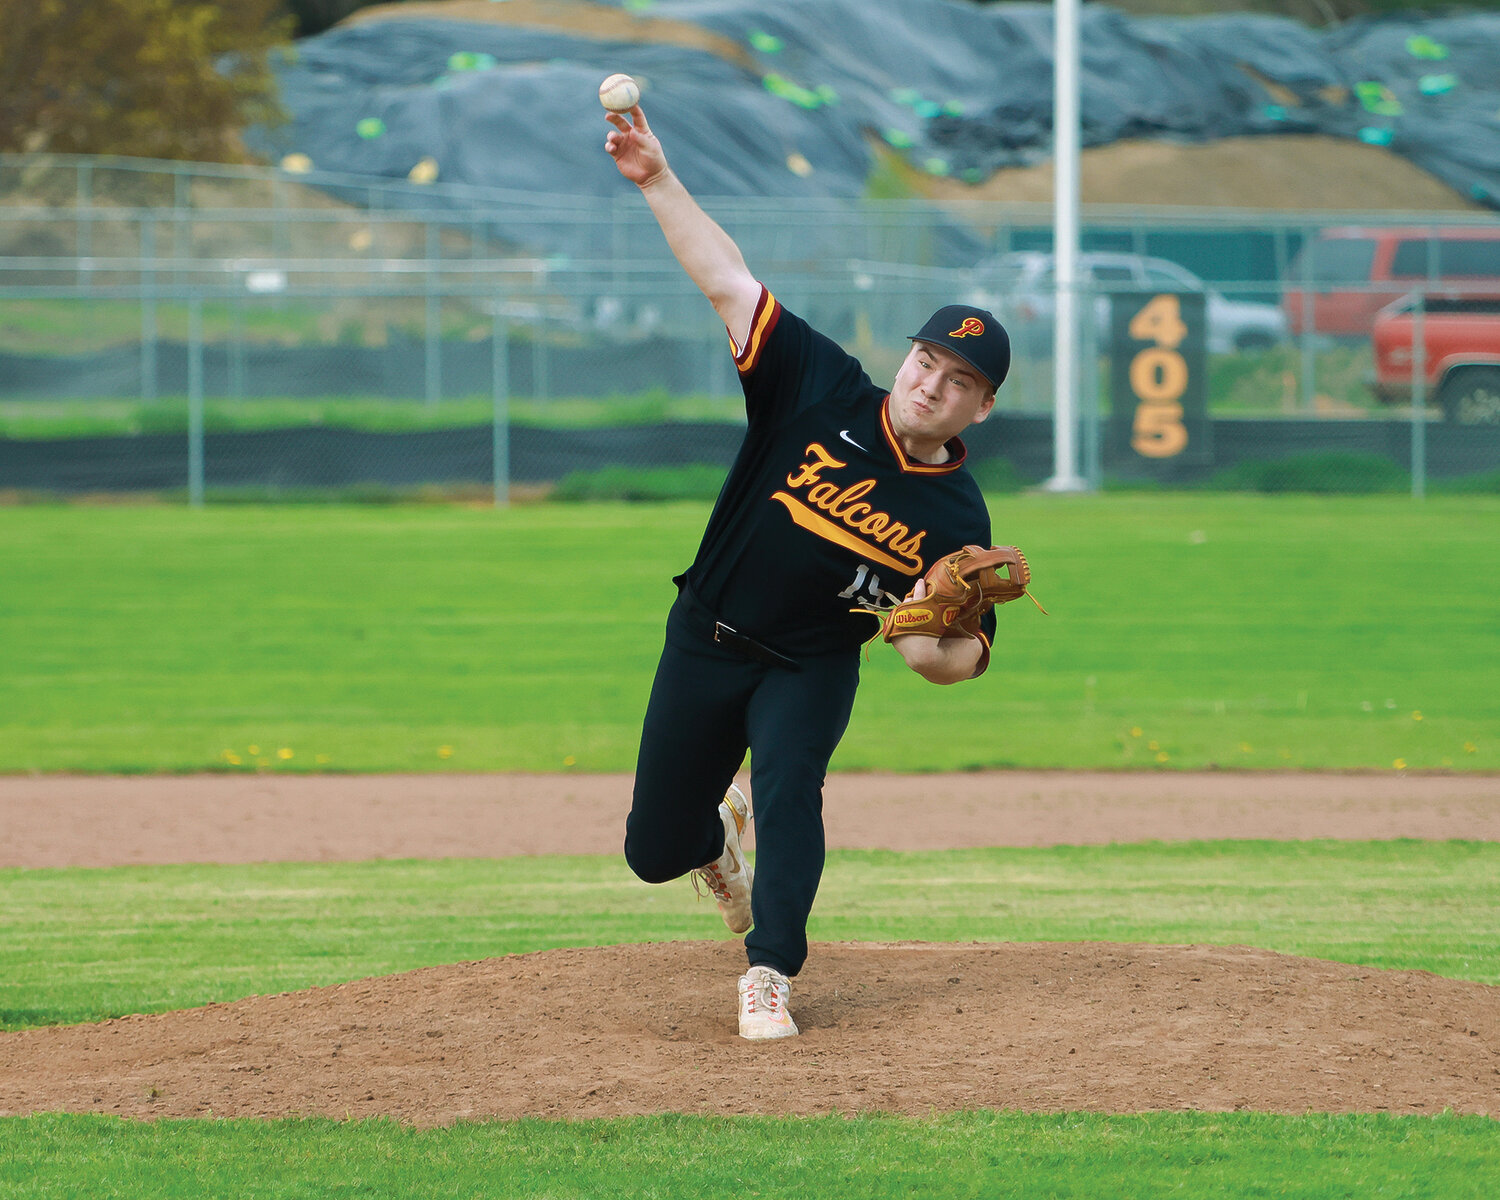 Prairie's Camden Hern was called to the mound for the first time this season during a game against Battle Ground High School on Tuesday, May 2.